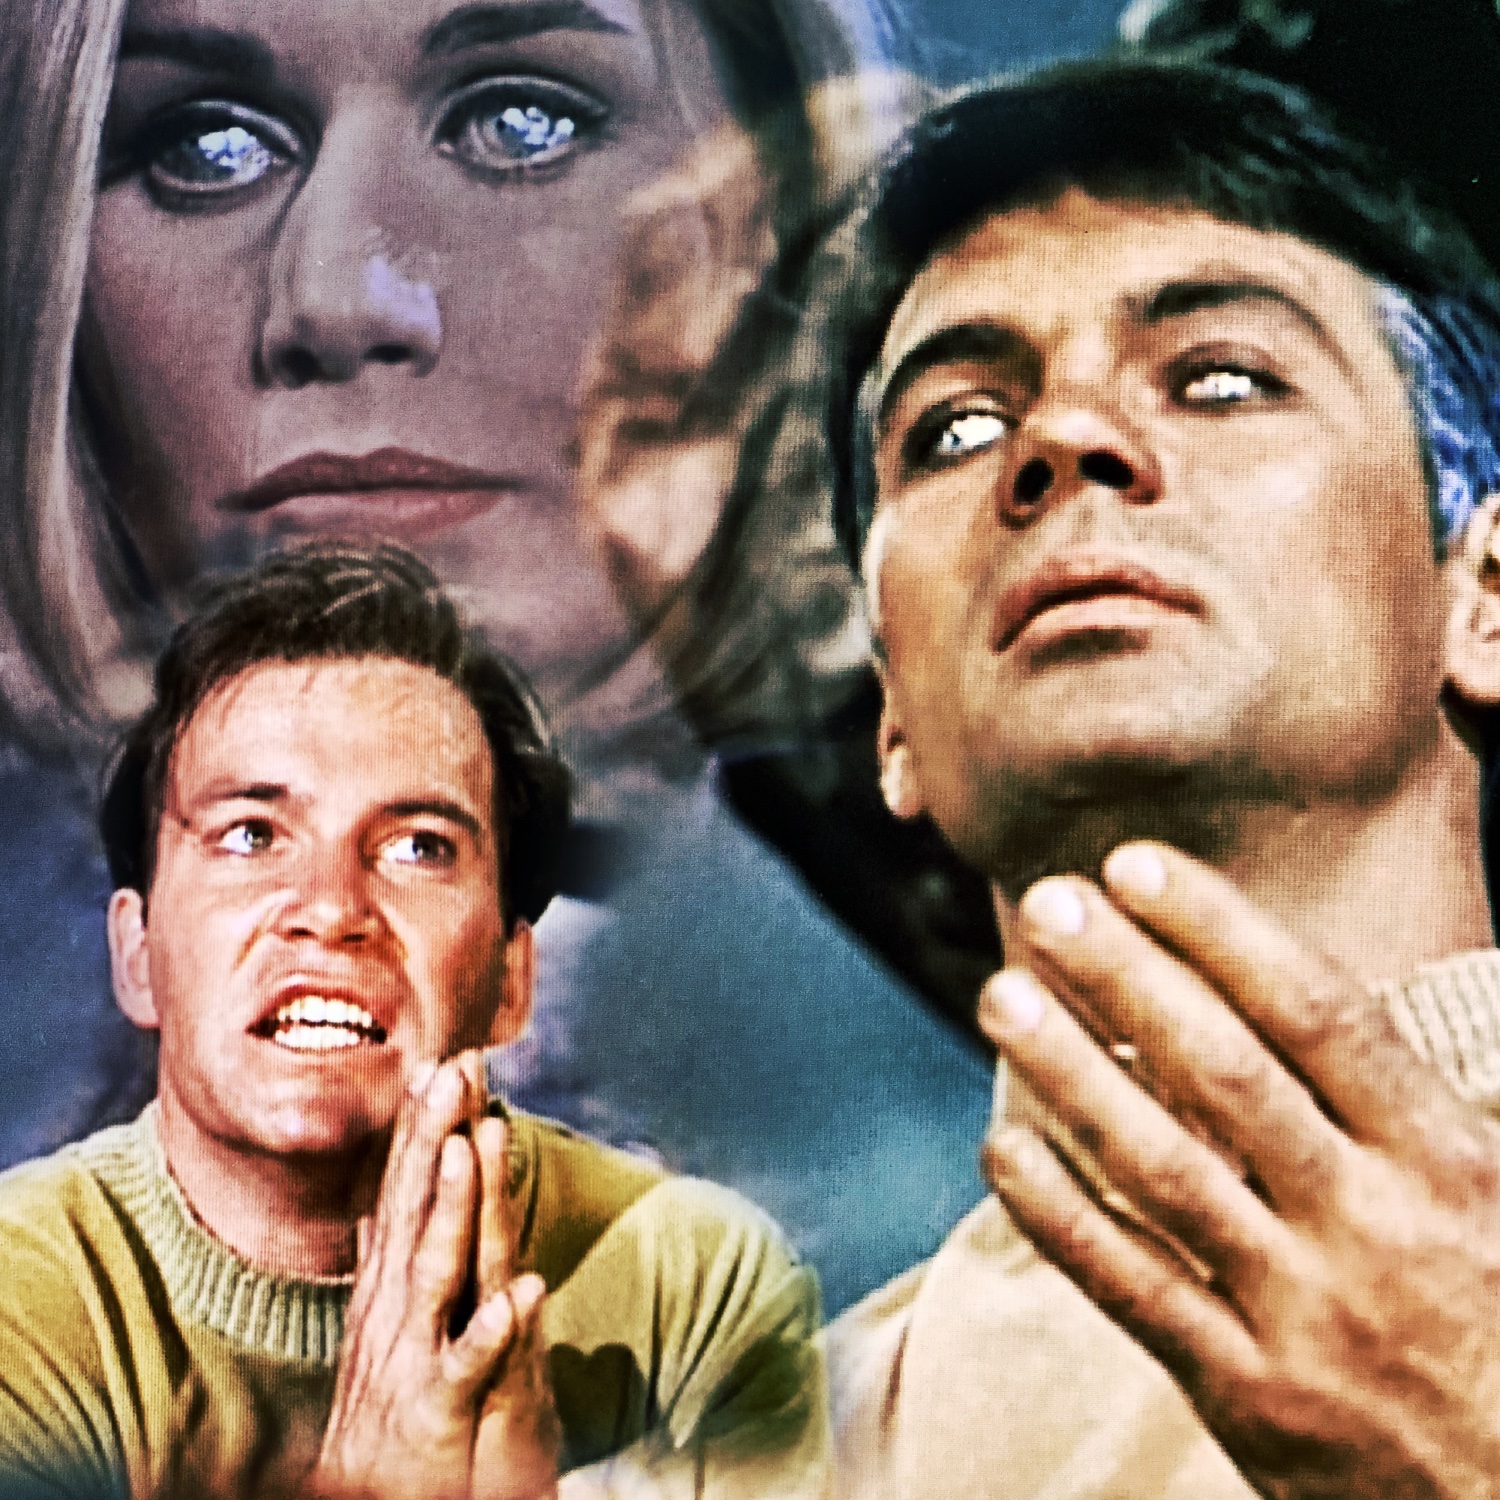 Collage of characters from the Star Trek episode "Where No Man Has Gone Before"; Gary Mitchell, Elizabeth Dehner, and James Kirk (whom is pleading with the other two).